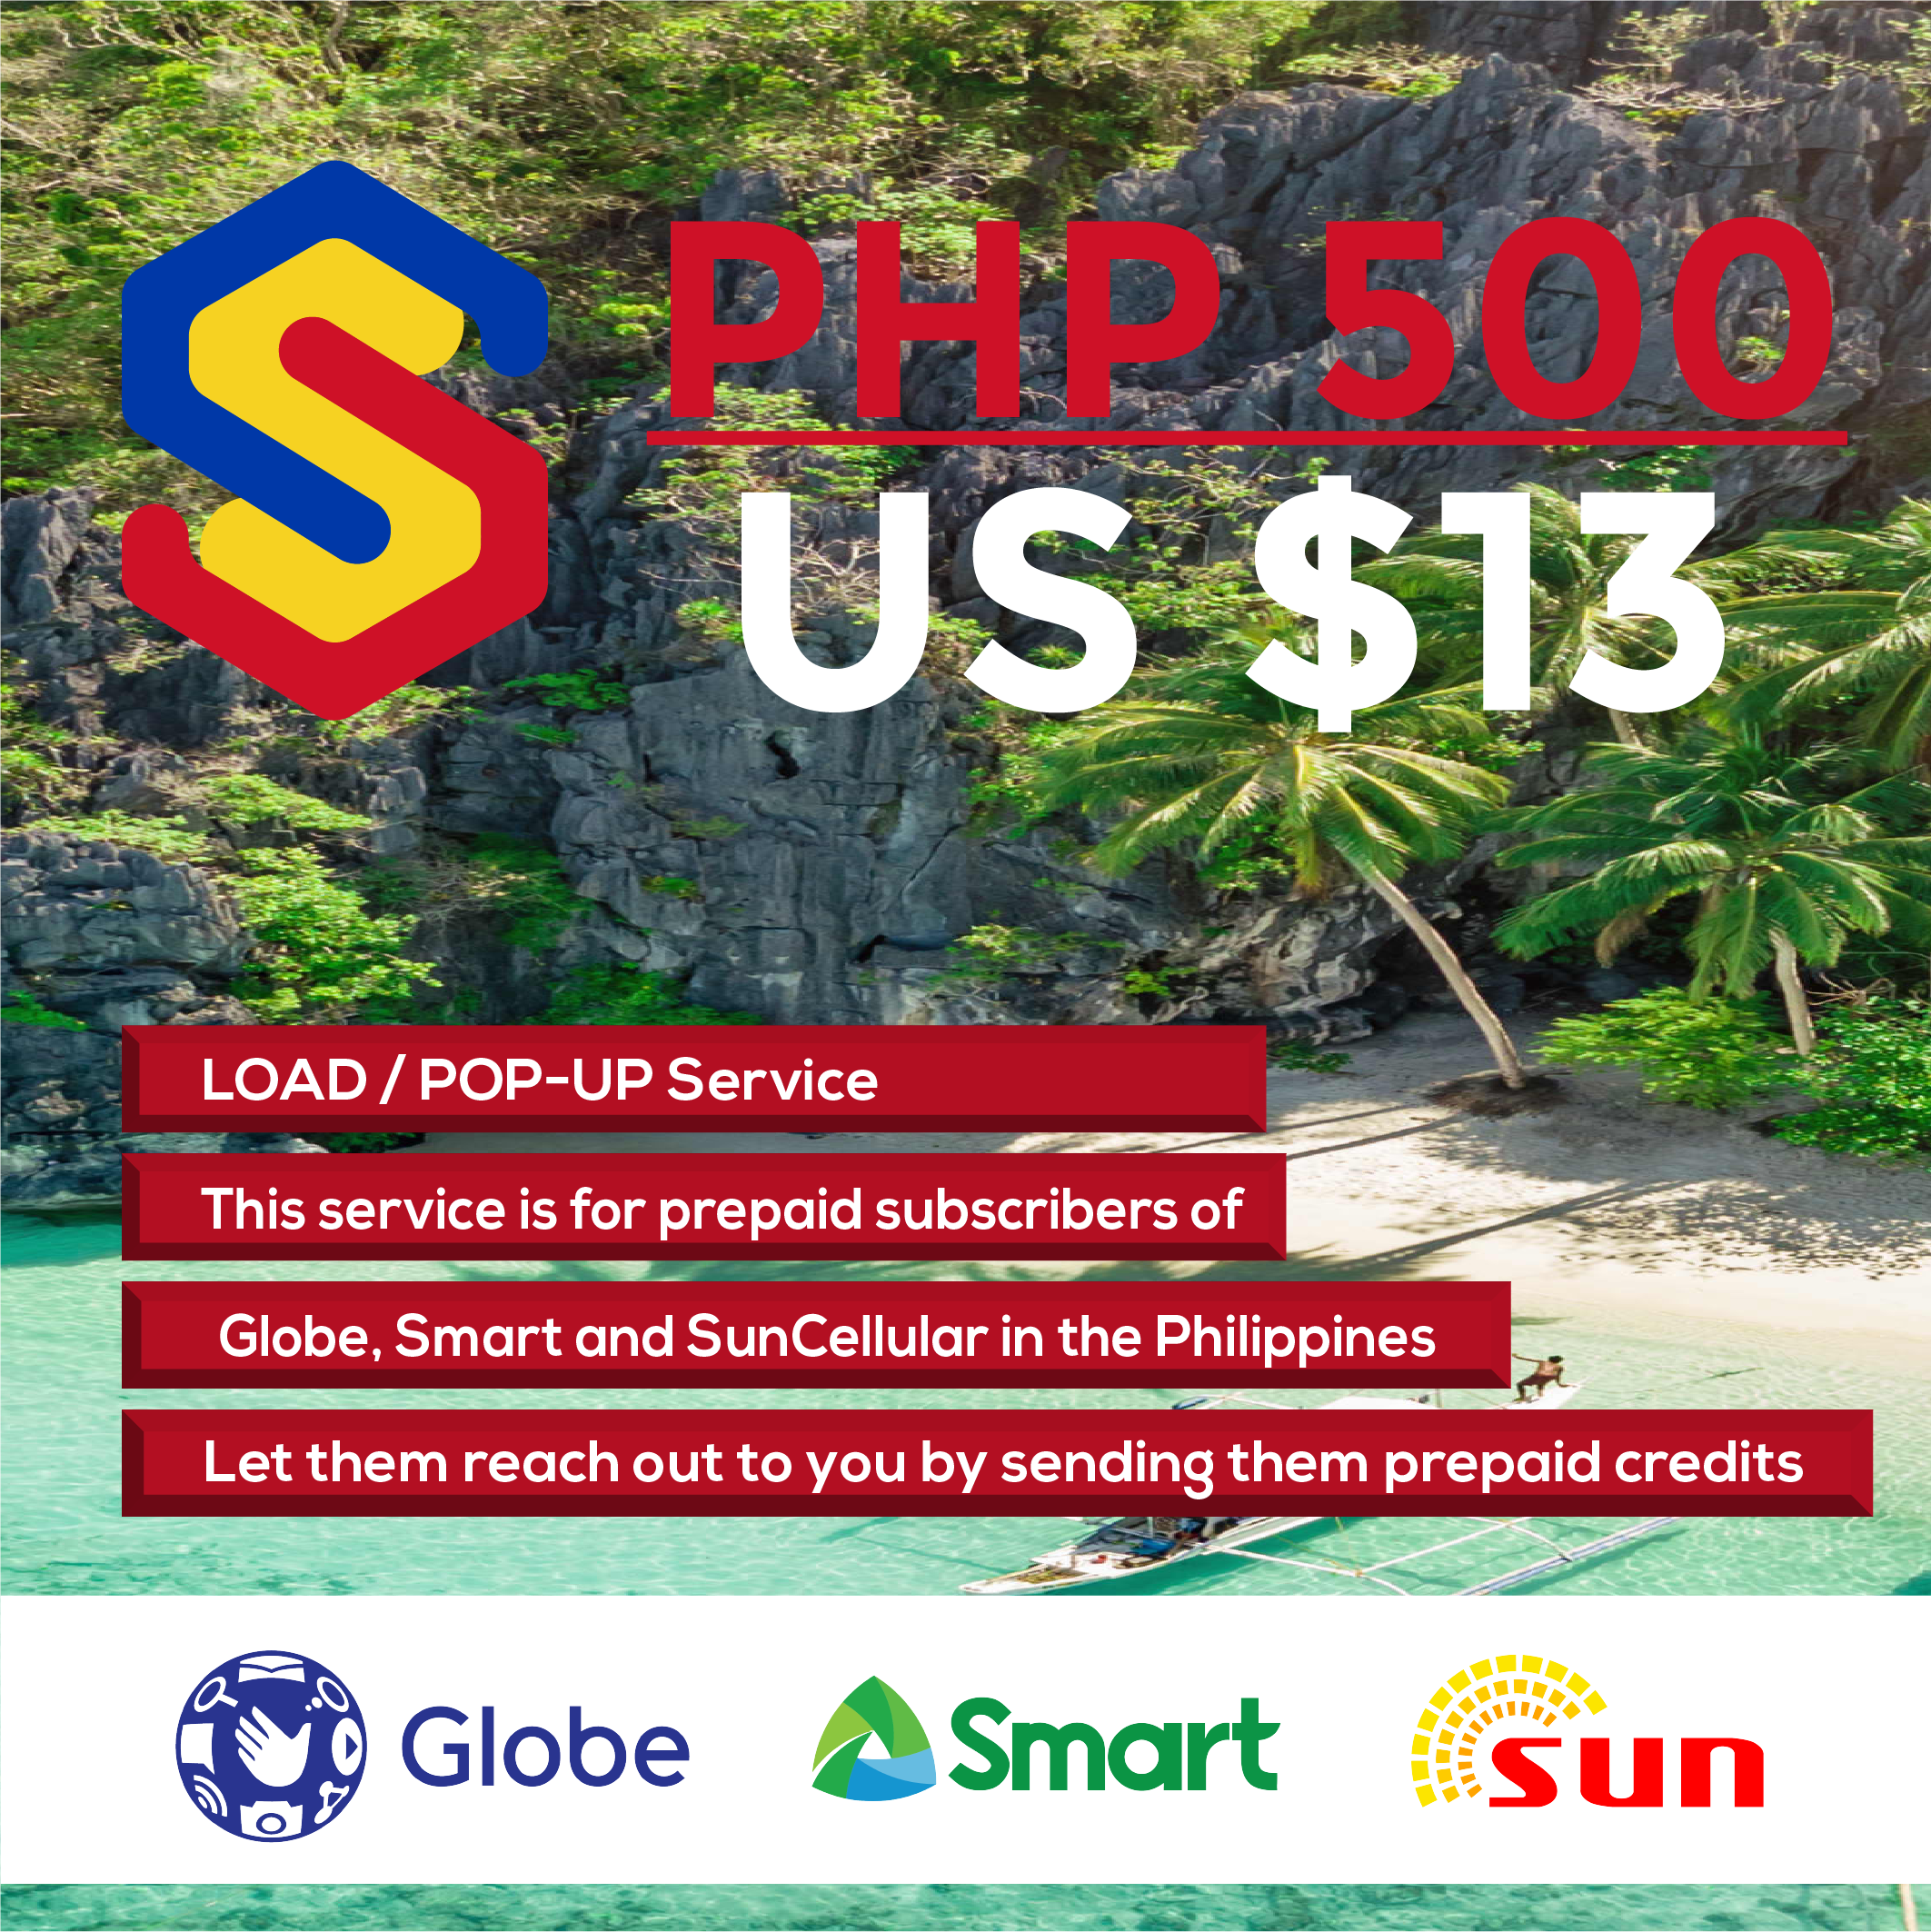 PHP 500 Load/Top-up